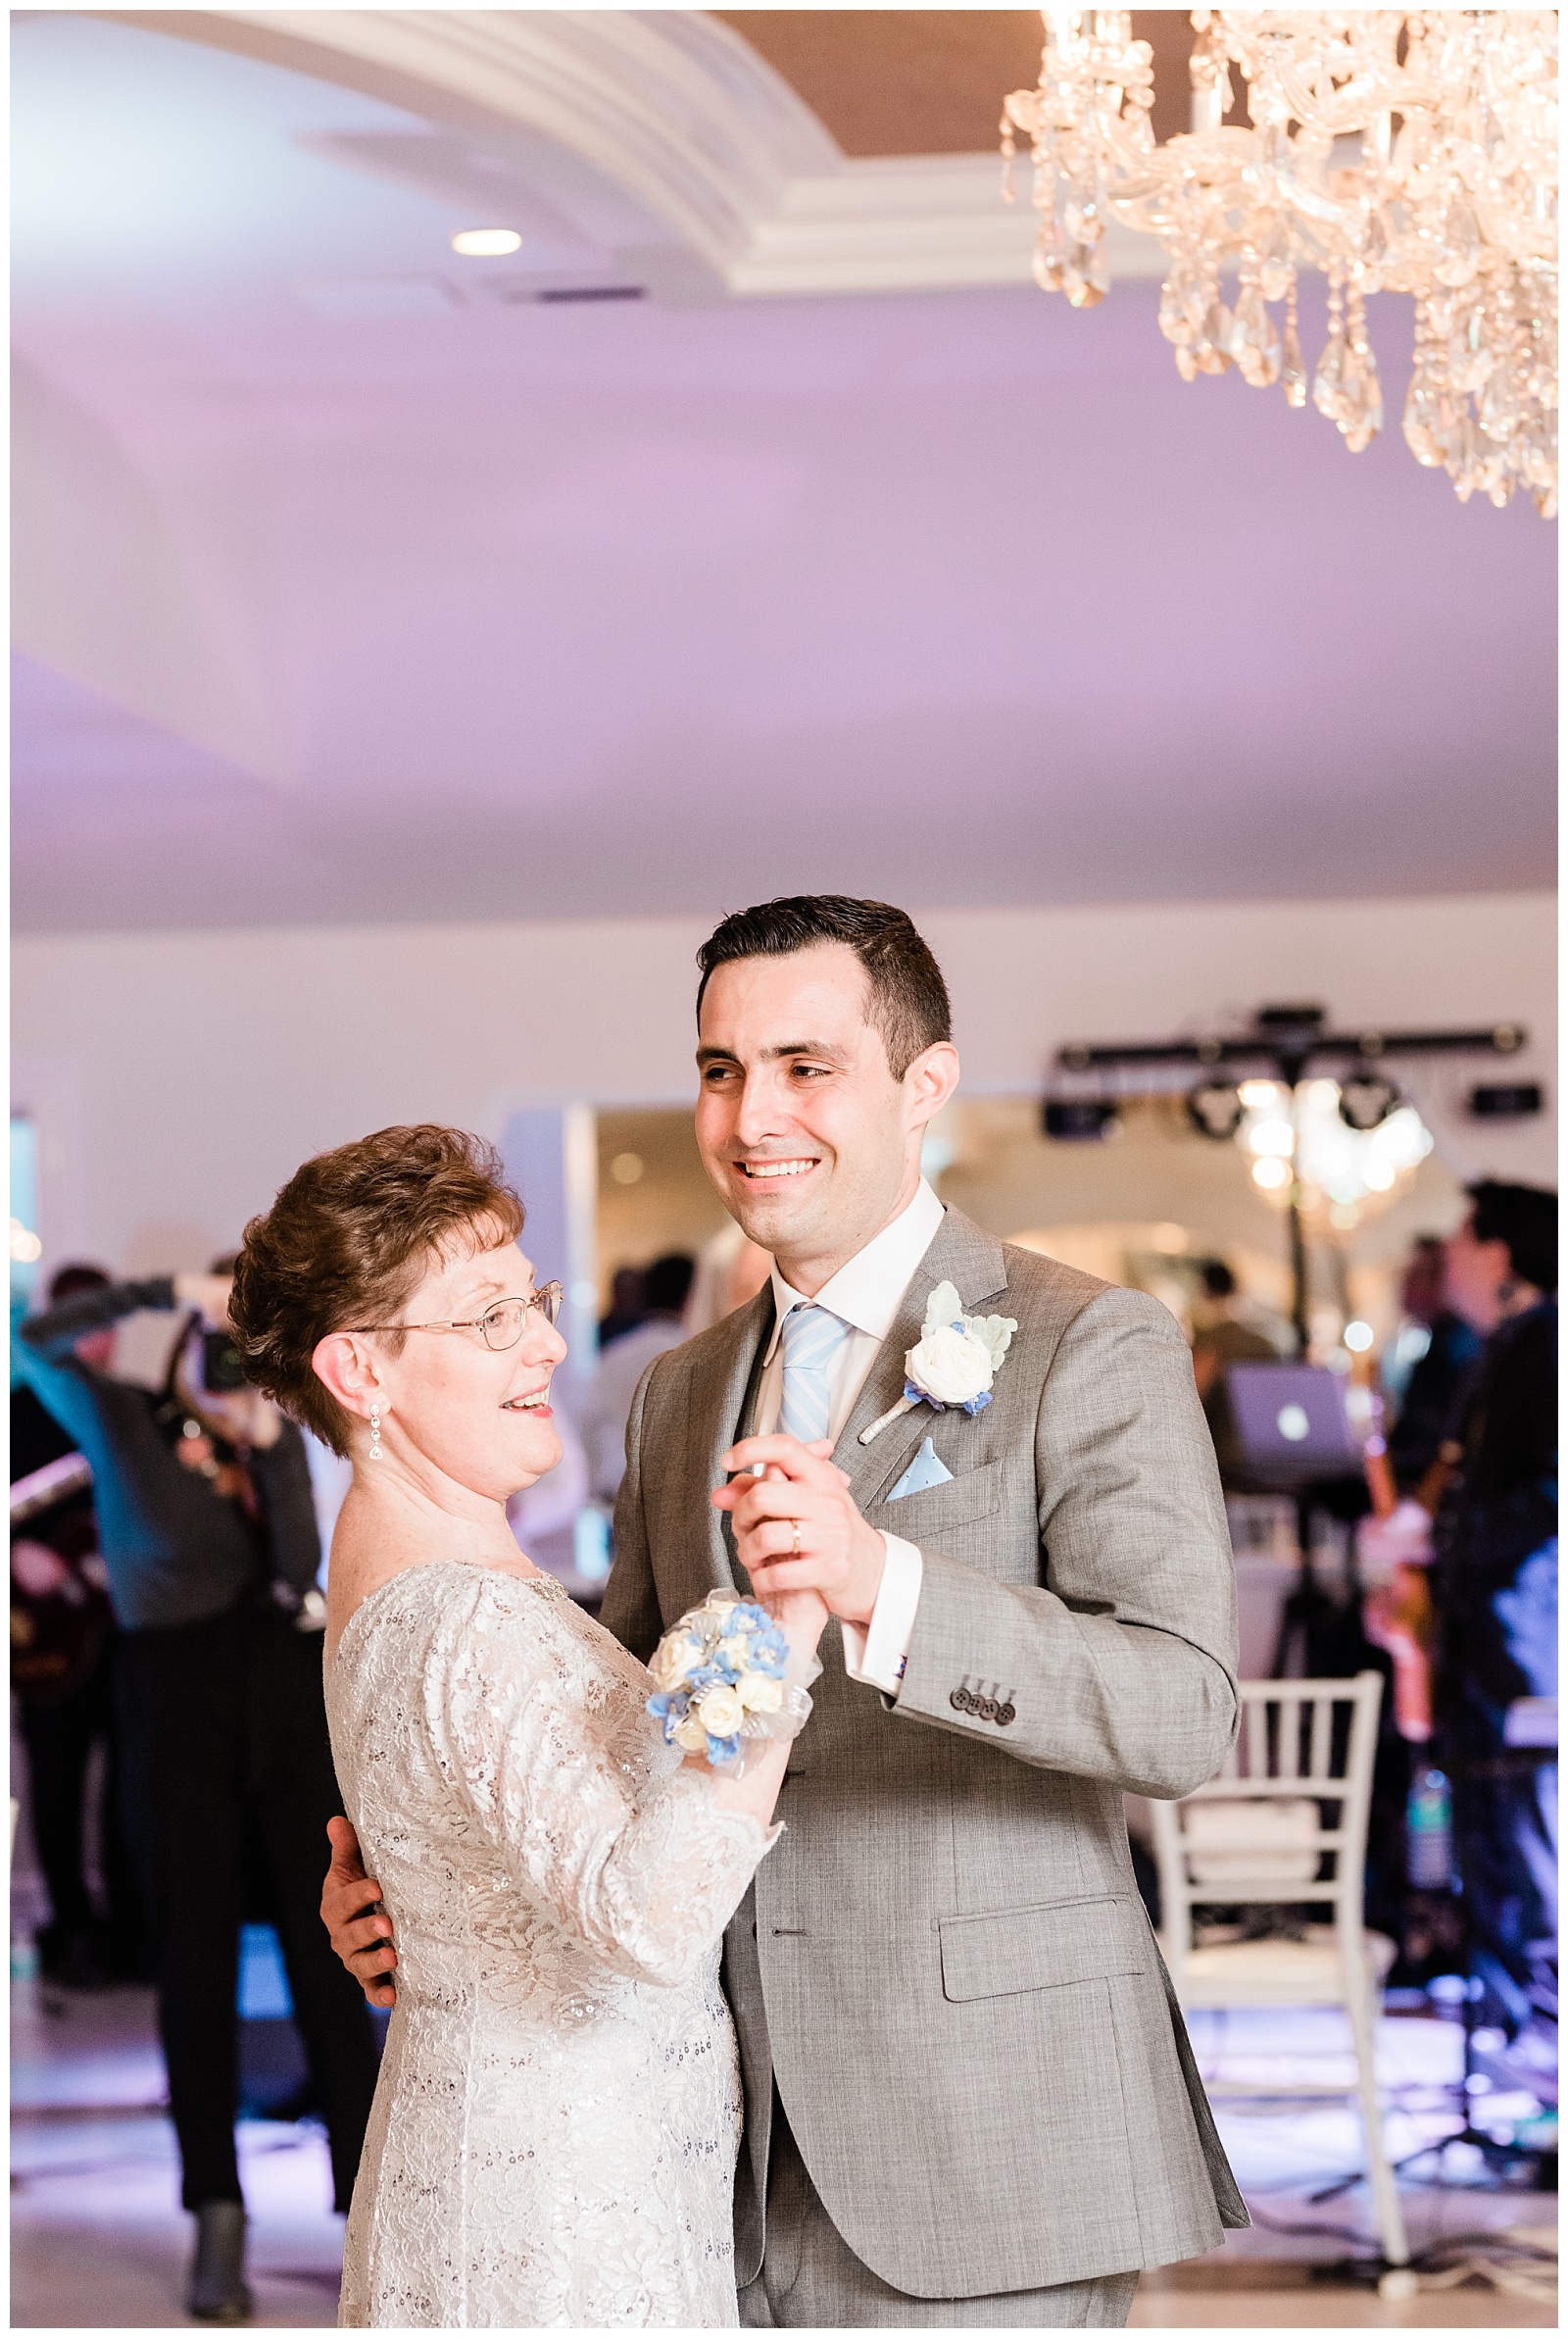 Groom dances with his mom during the wedding reception.